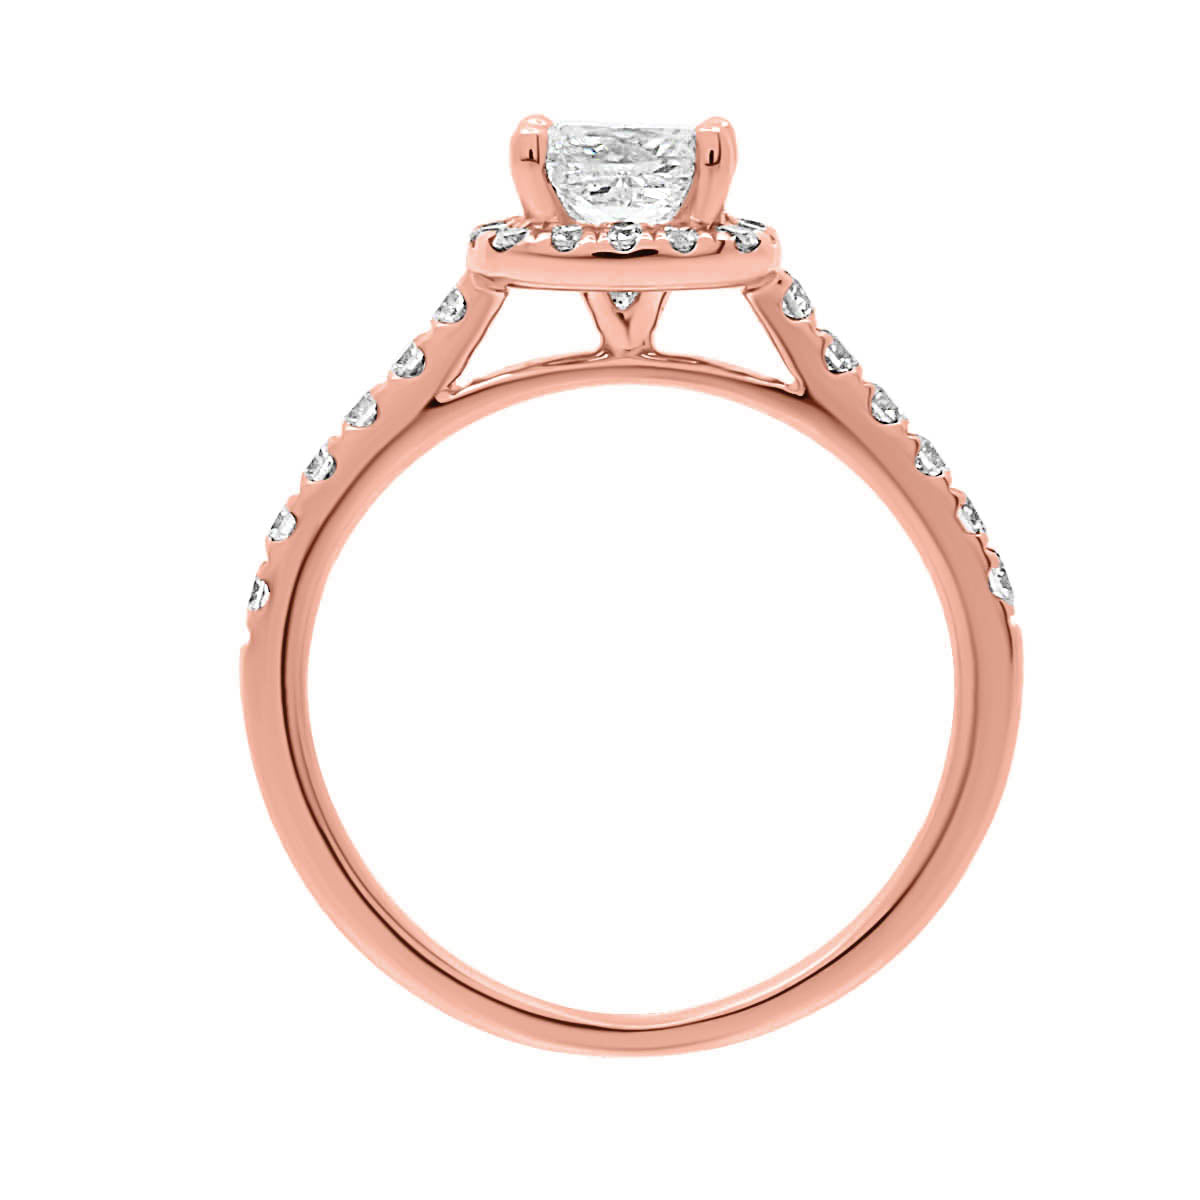 Princess Cut Diamond Halo Ring in rose gold in a vertical position on a white background 